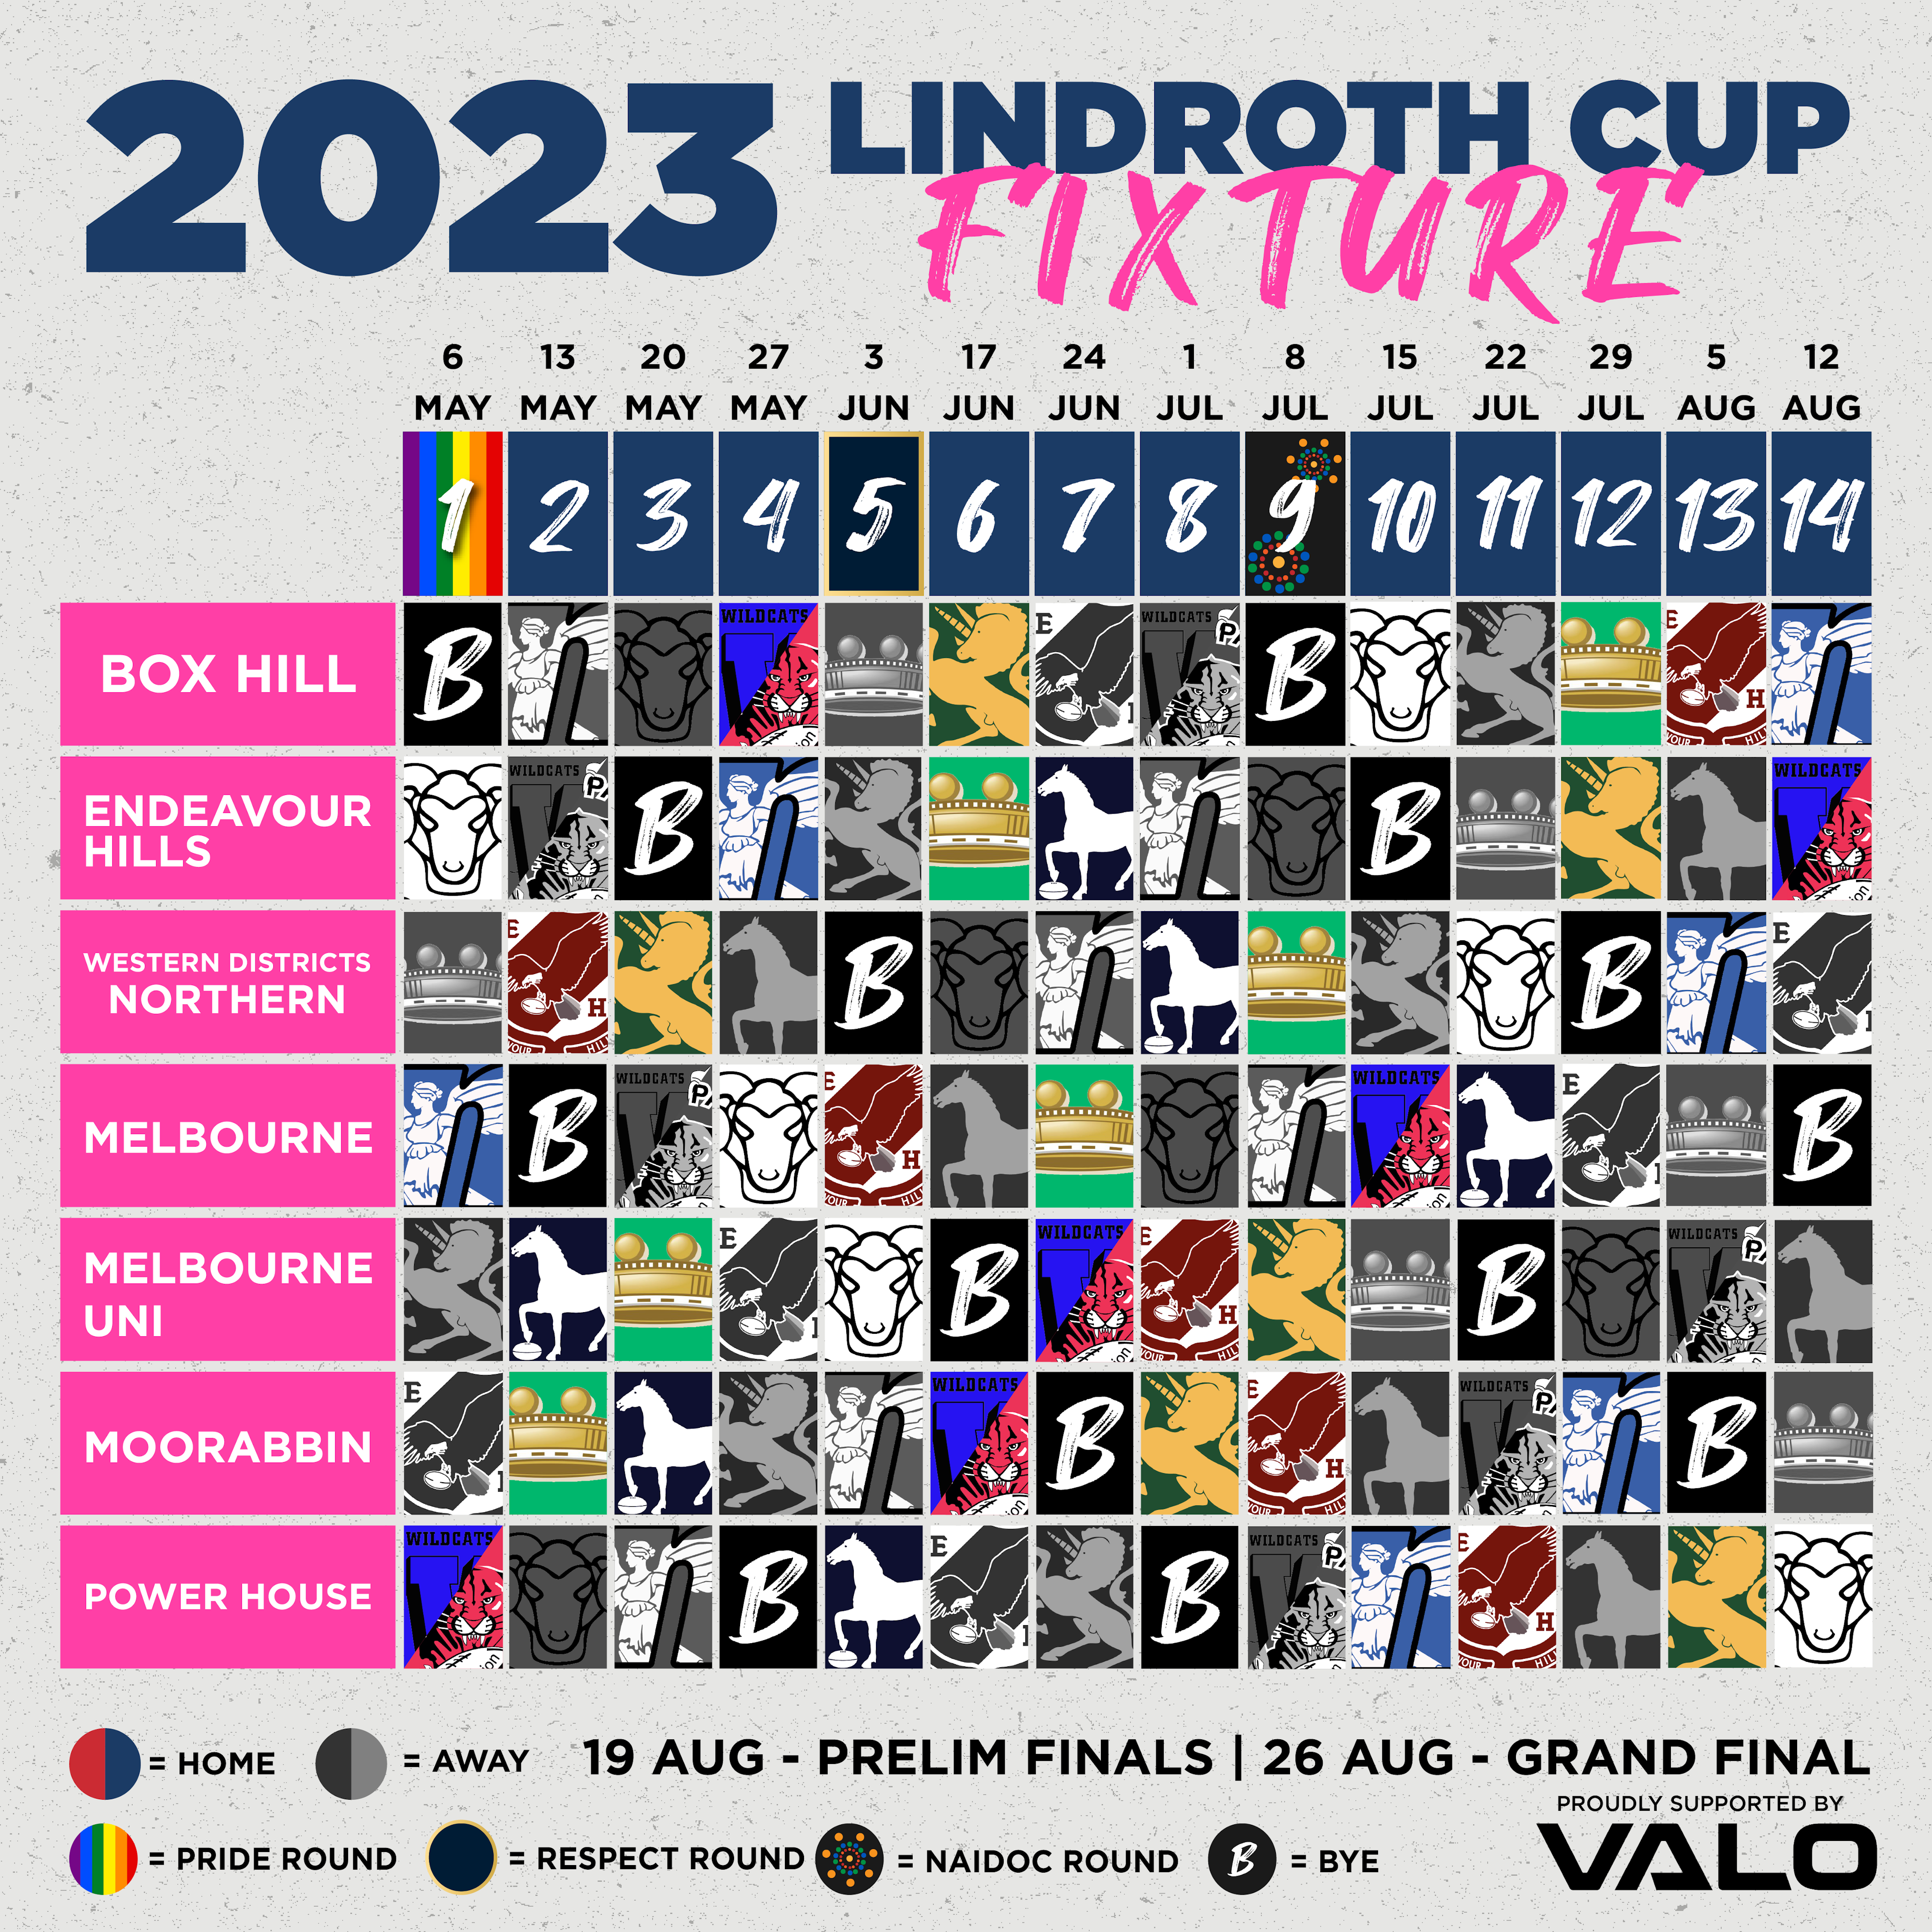 2023 Lindroth Draw